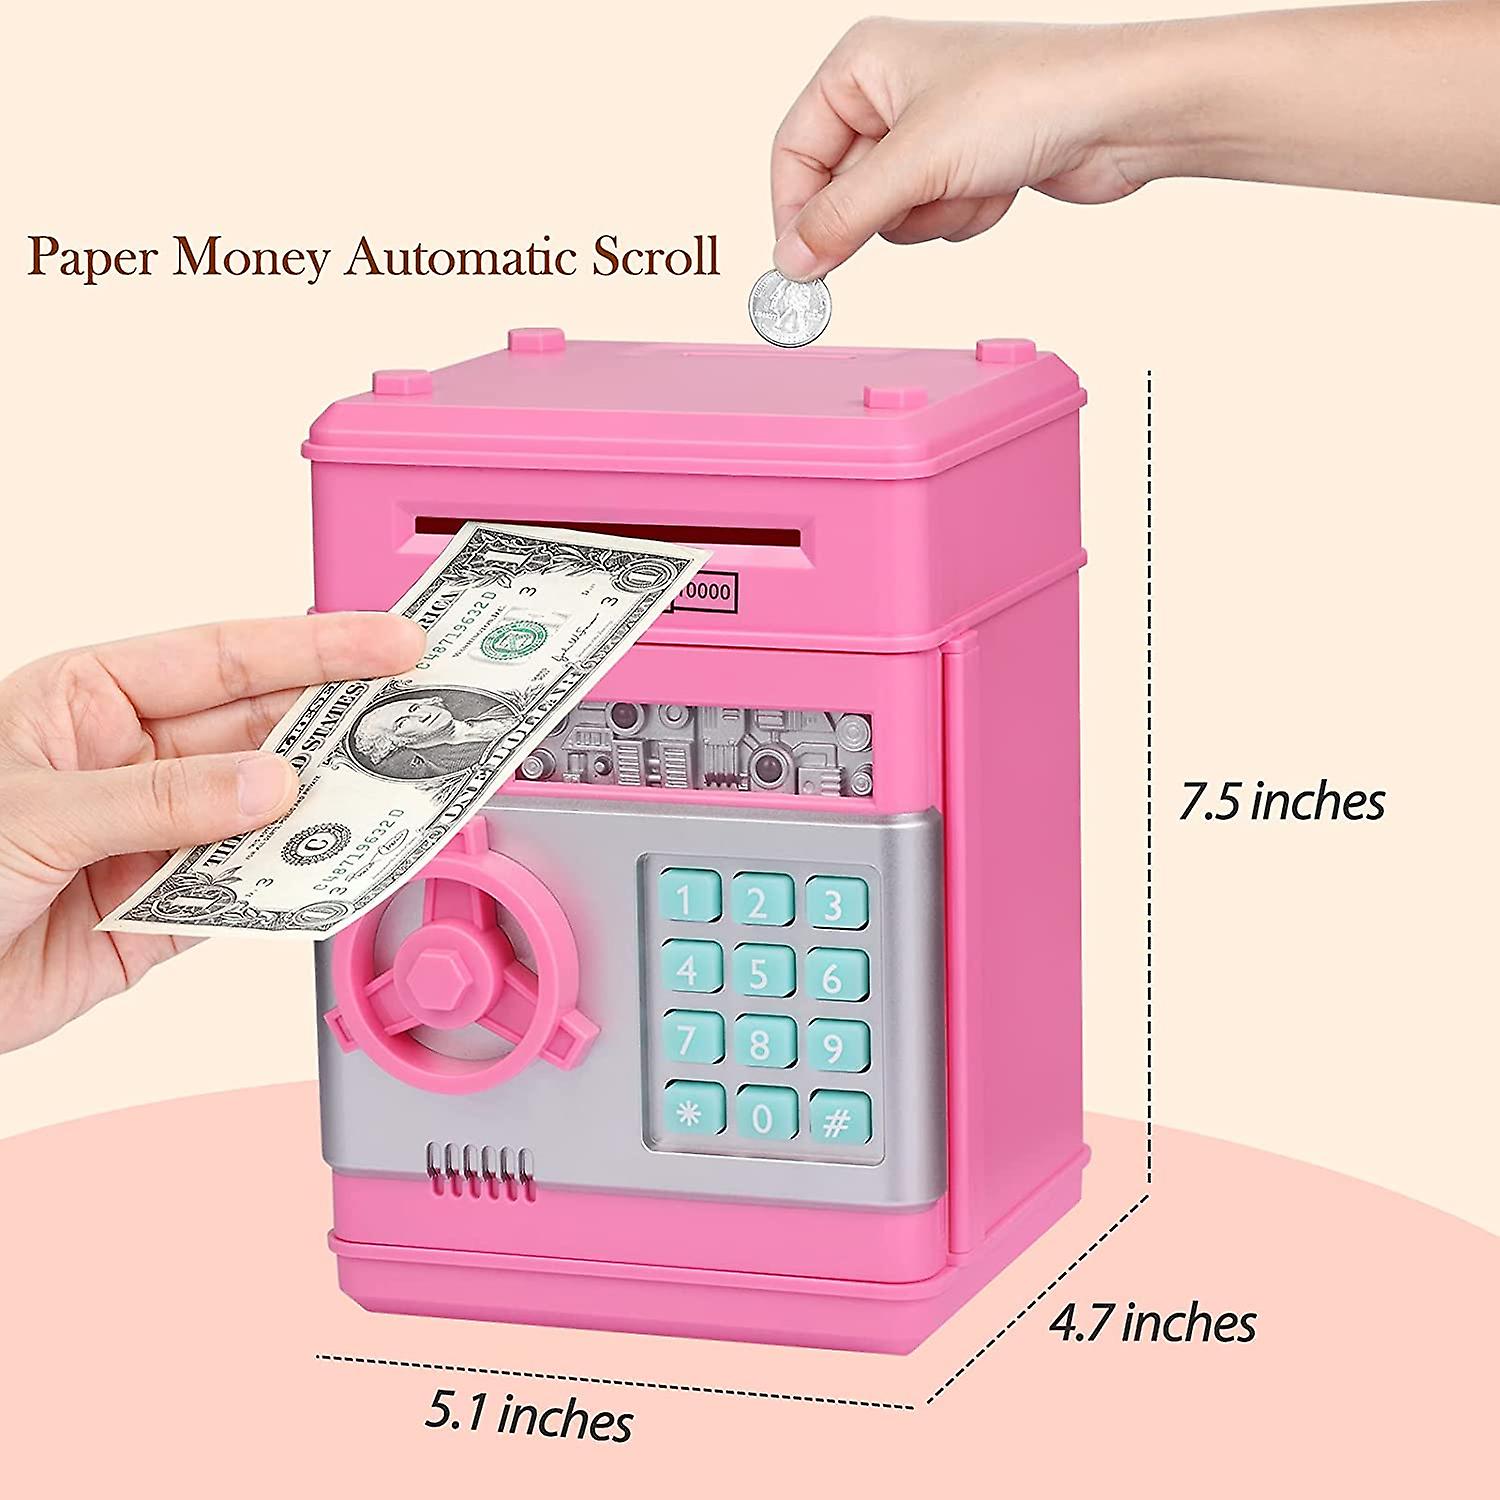 Kids Stuff Piggy Bank， Auto Scroll Paper Money Atm， Electronic Real Coin Bank With Safe Password Lock， Plastic Large Saving Box， Gifts Toys For 3 4 5